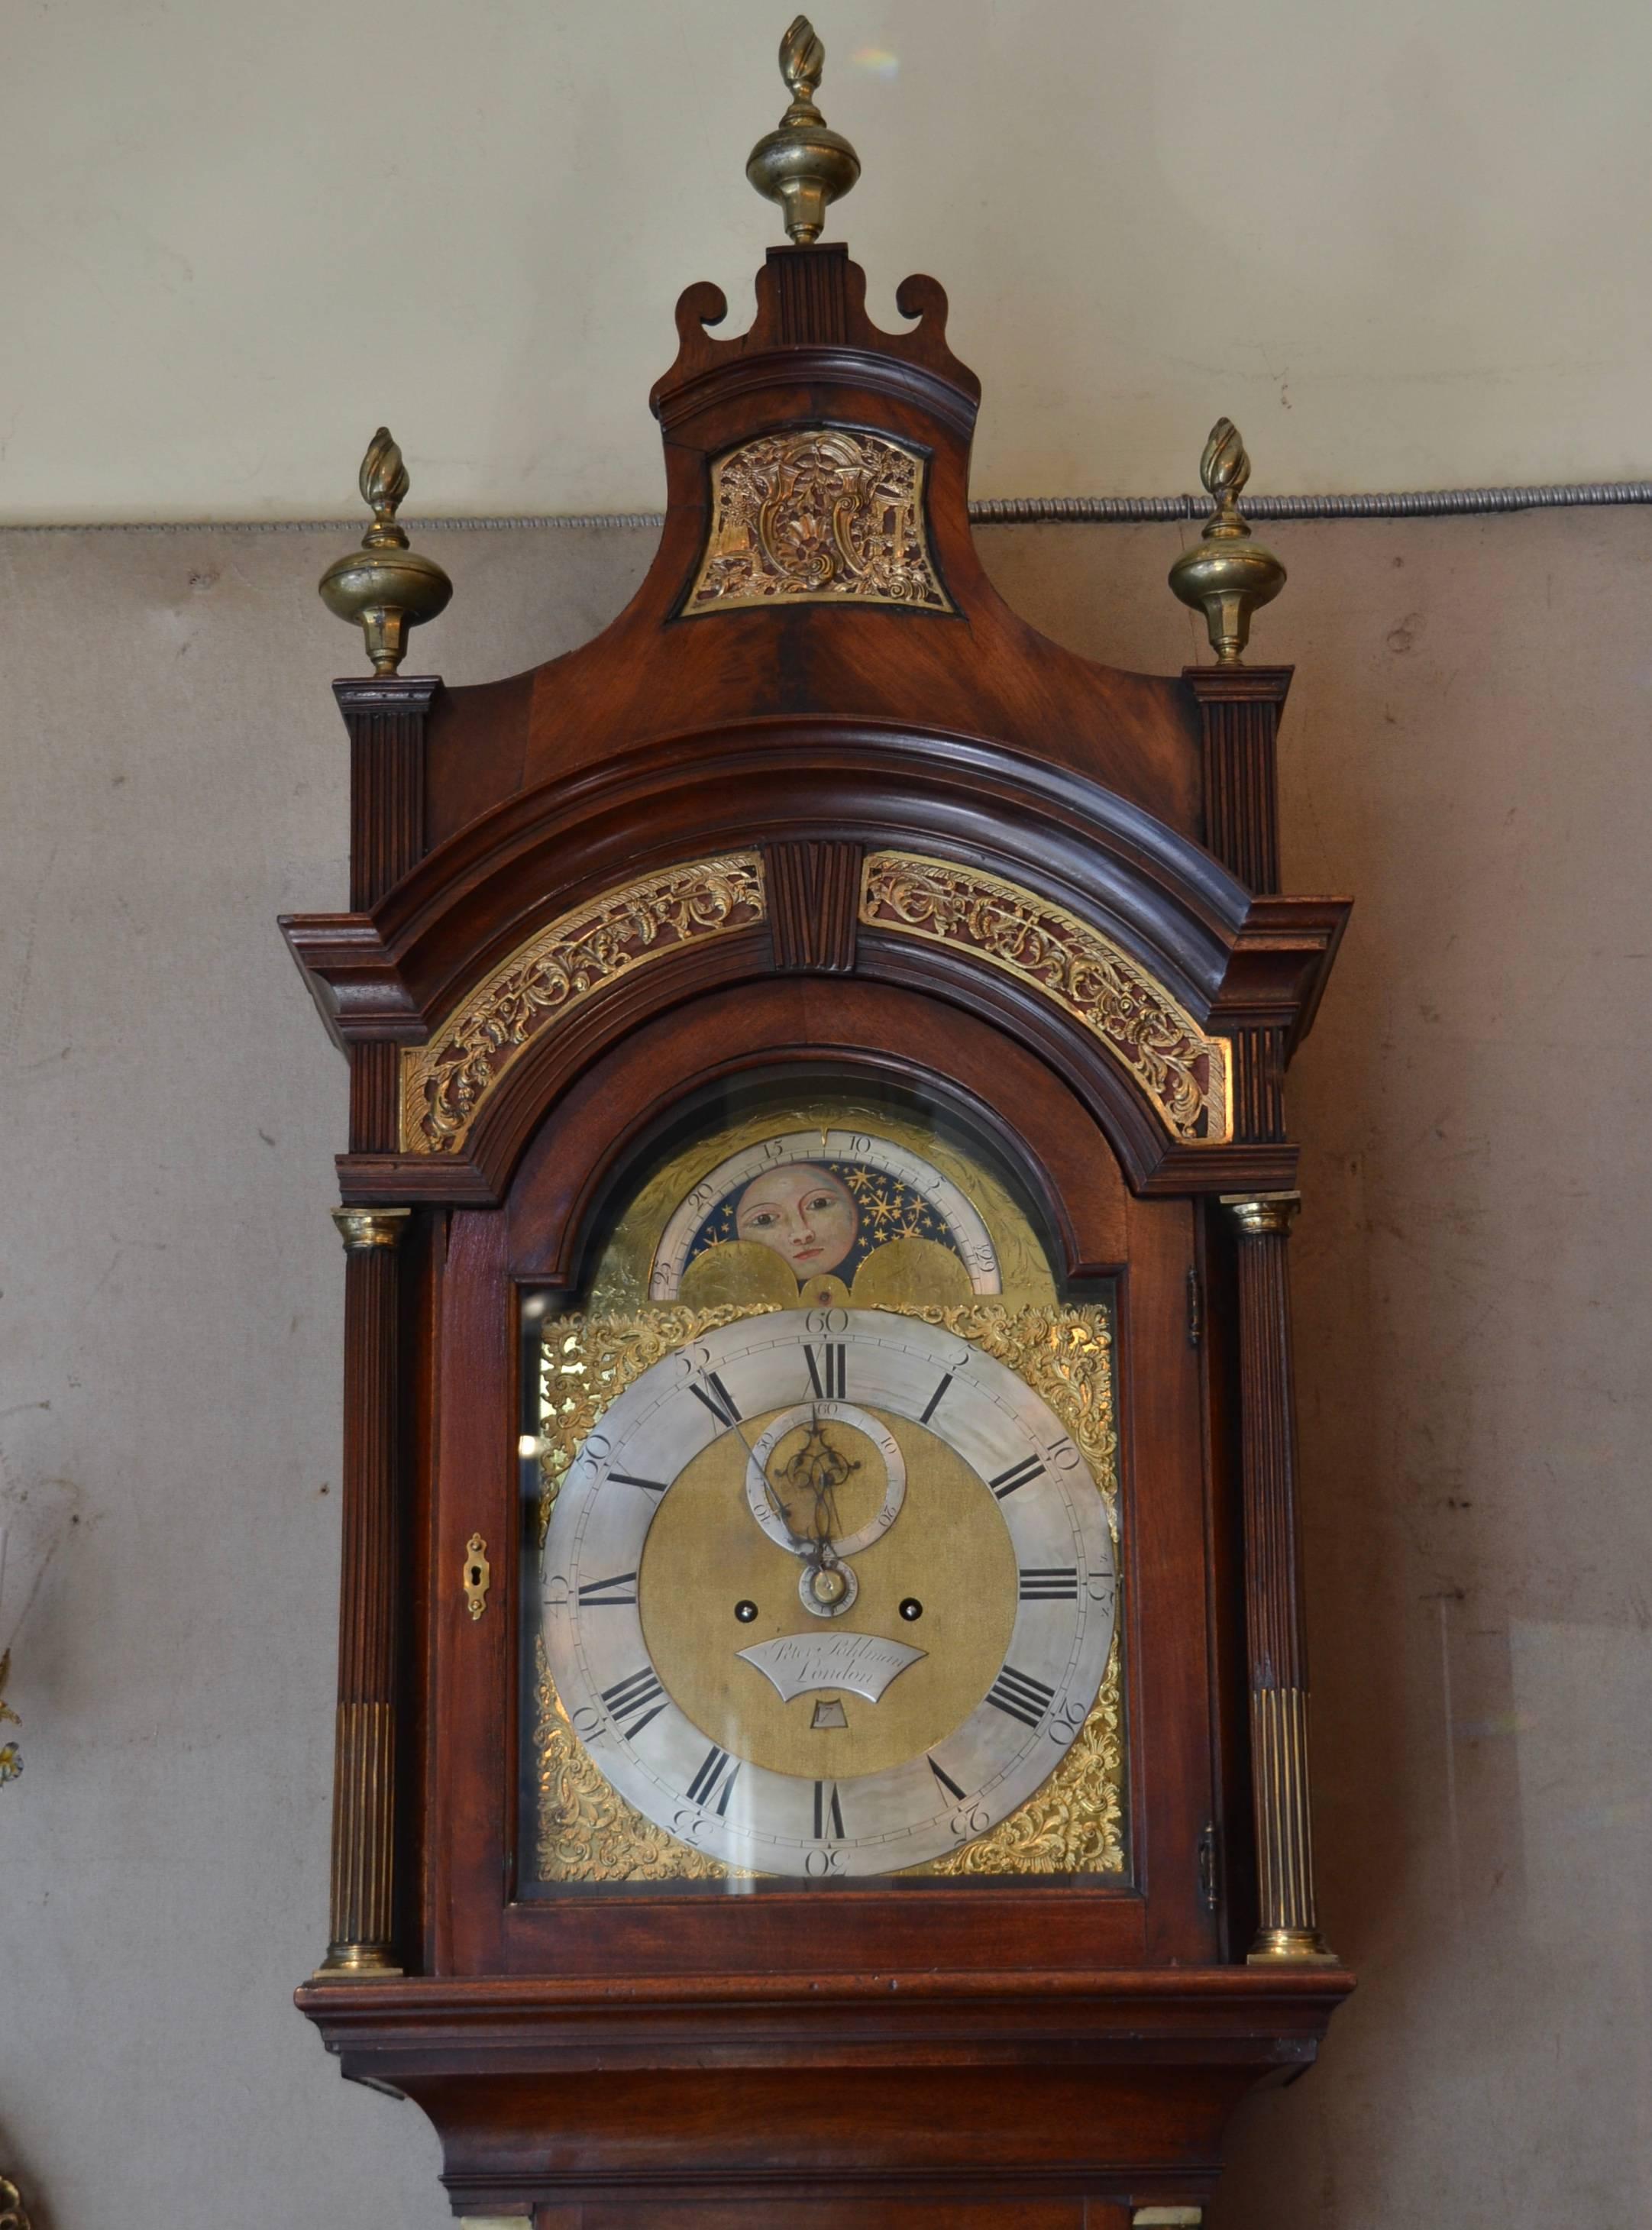 Antique English George III flame mahogany tall case clock by Peter Pohlman, circa 1760. This clock has 8 day movement striking on the hour with moon phase and second hand and calendar function.